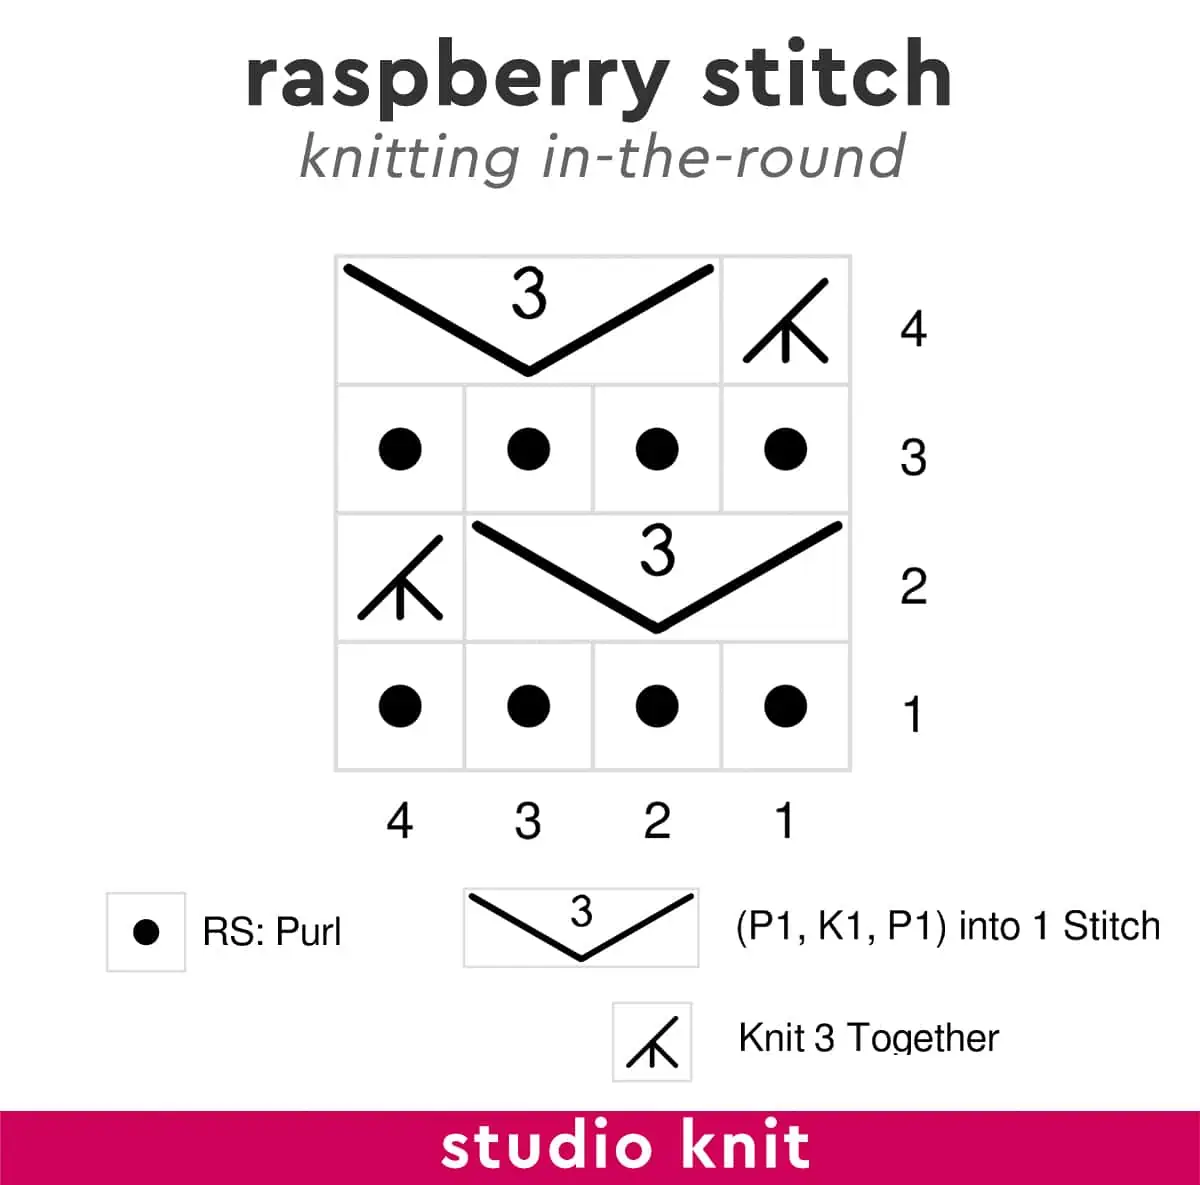 Knitting chart diagram of the Raspberry Bobble Stitch knitted in-the-round.